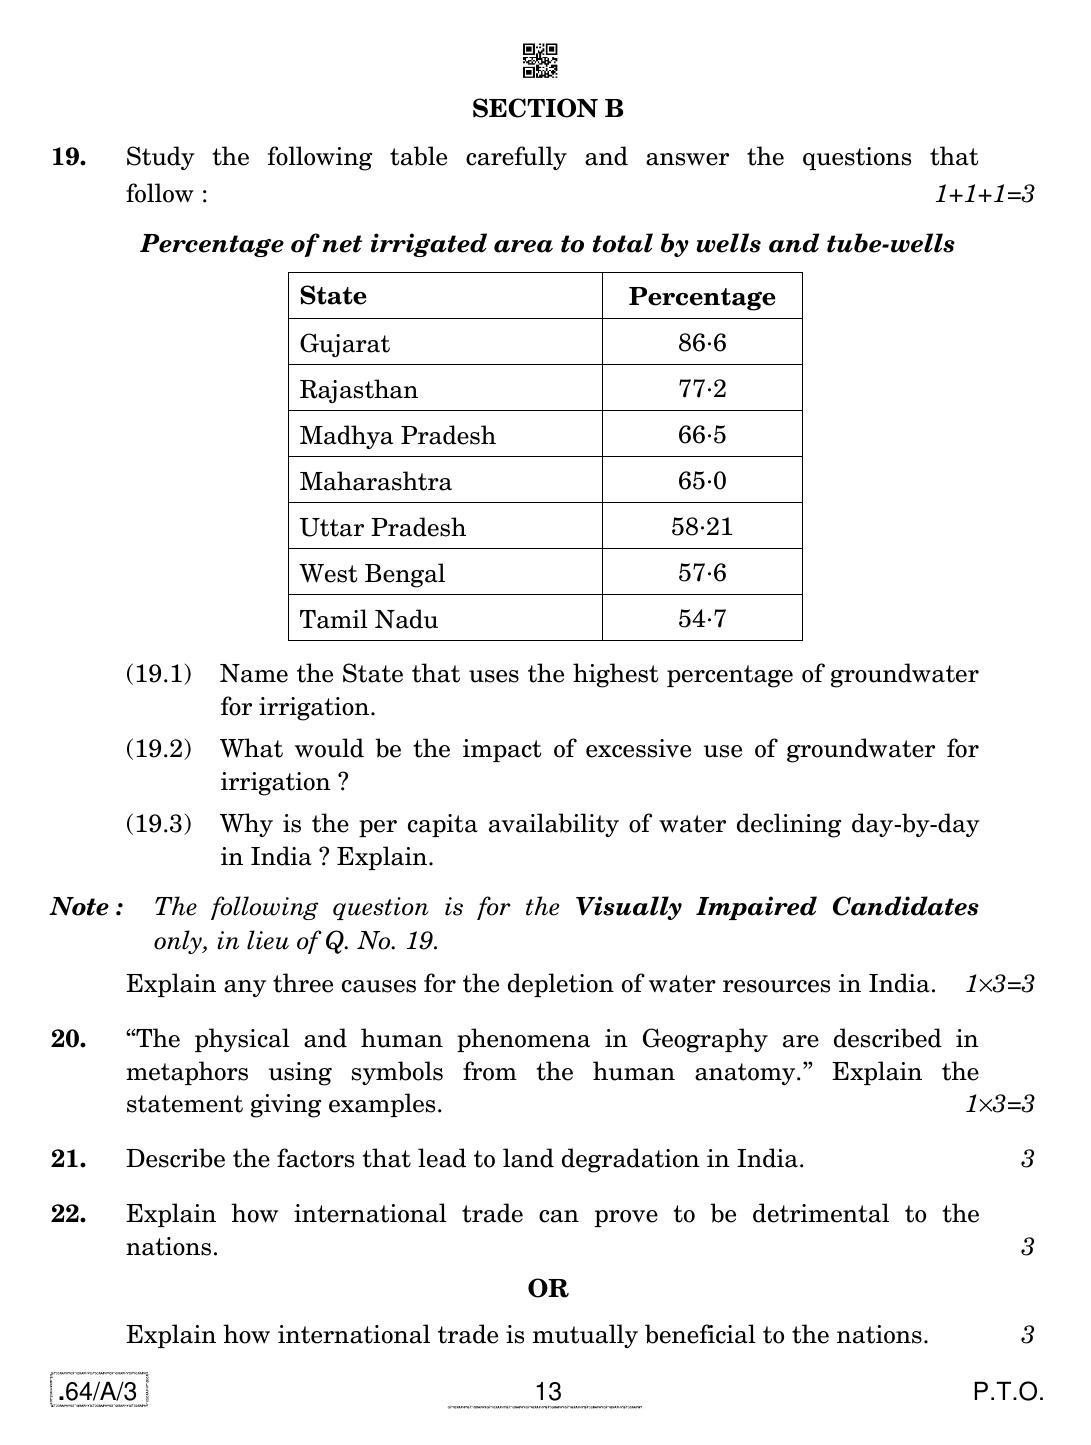 CBSE Class 12 64-C-3 - Geography 2020 Compartment Question Paper - Page 13